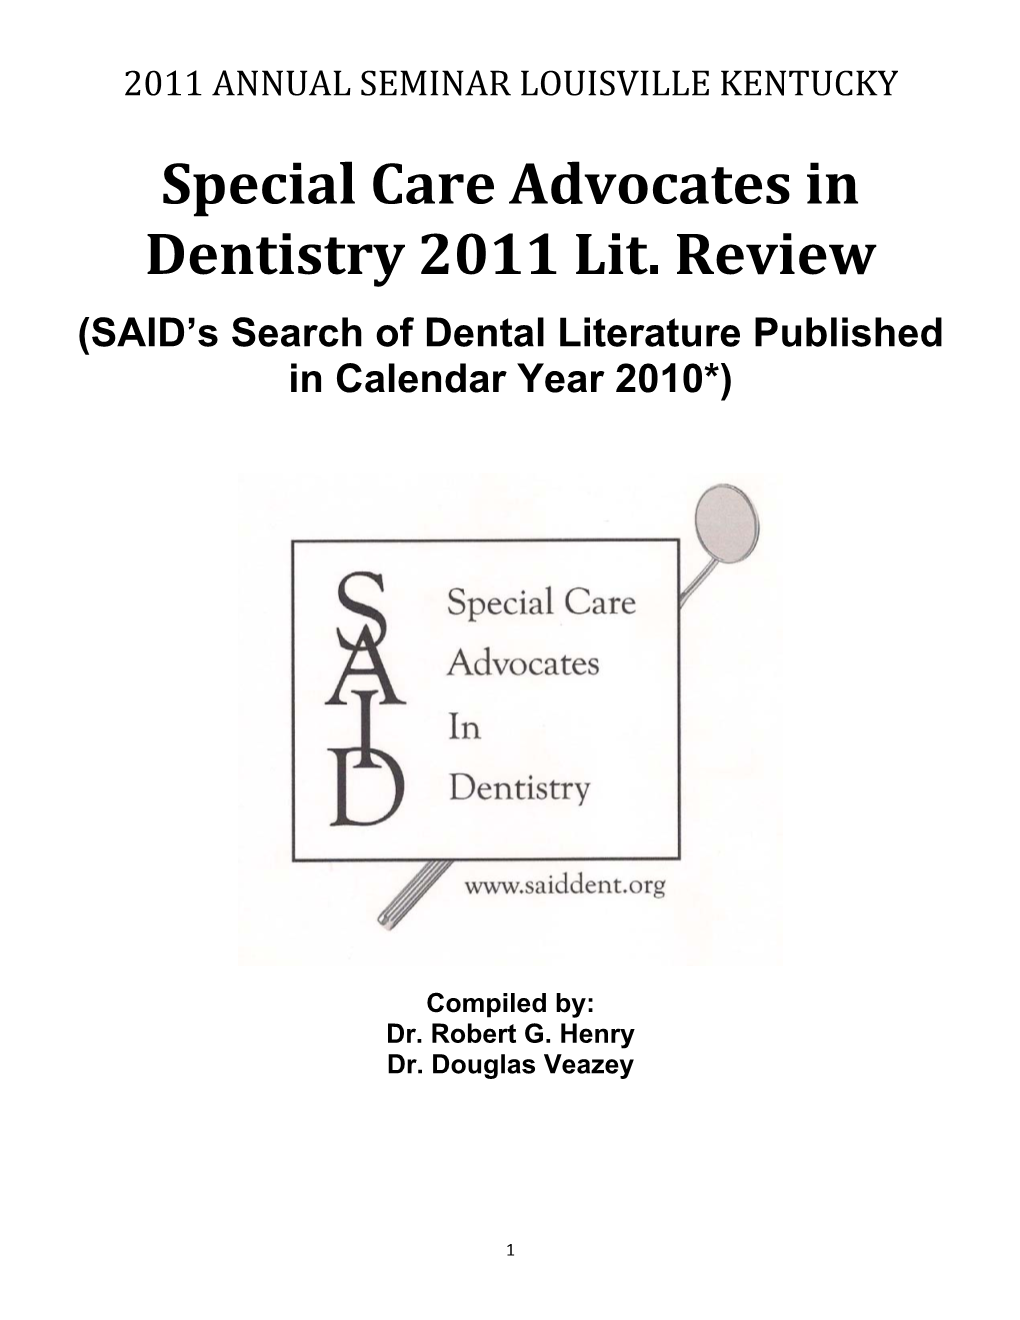 Special Care Advocates in Dentistry 2011 Lit. Review